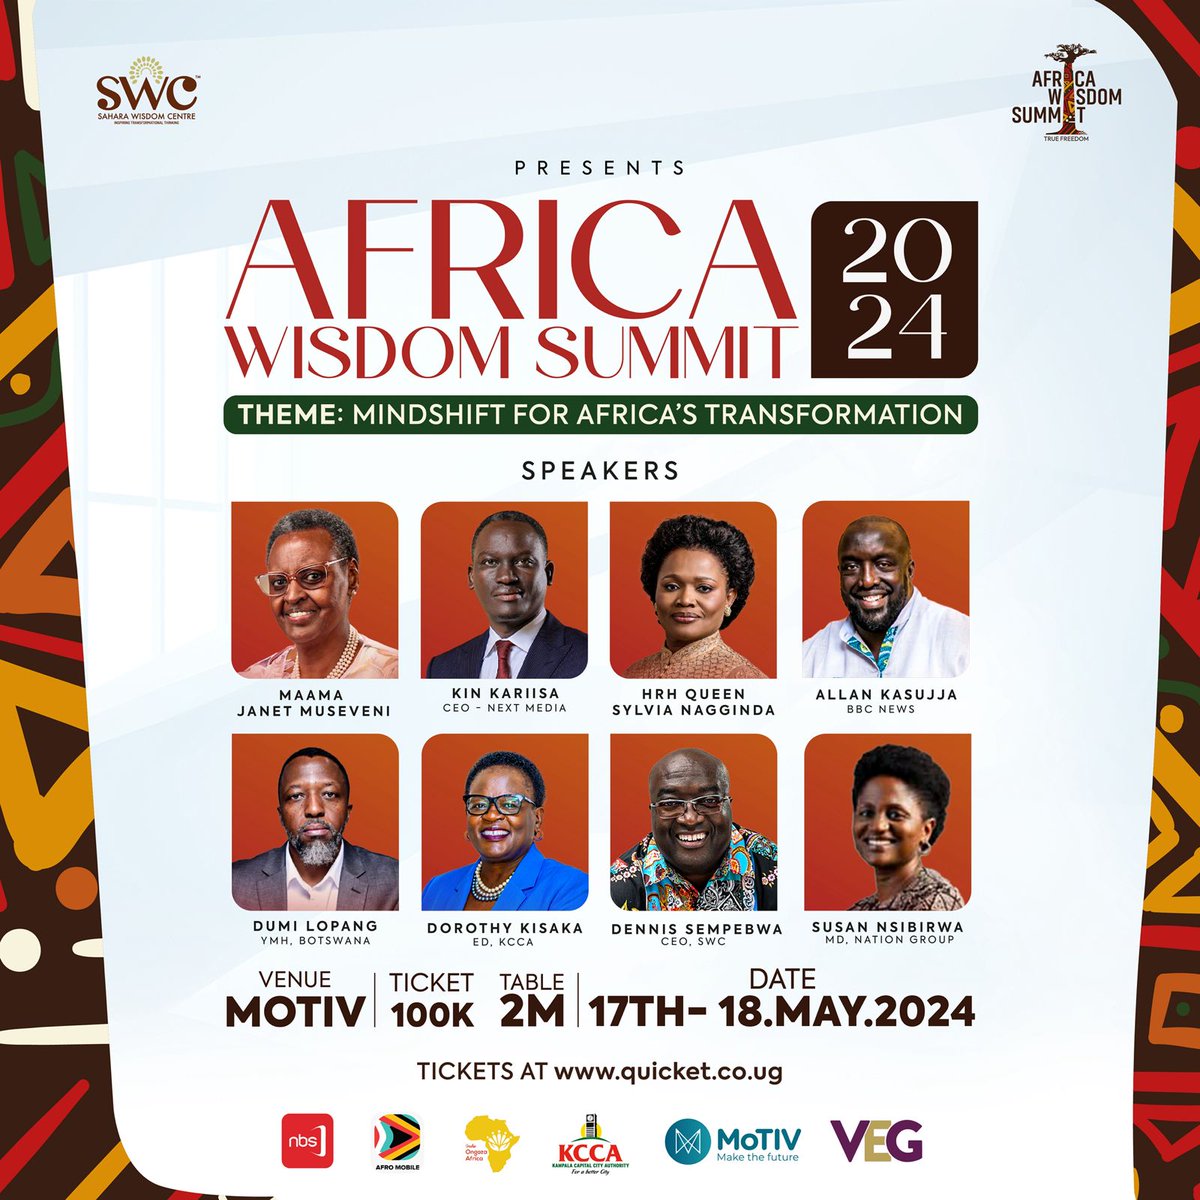 Knowledge meets Impact📚

Don’t miss out on the chance to be part of the groundbreaking #AfricaWisdomSummit 🇺🇬 at @MotivUG as thought leaders, innovators & visionaries converge to inspire a Mindshift for Africa's Transformation

Book your spot: shorturl.at/jnyzV
#AfWS2024